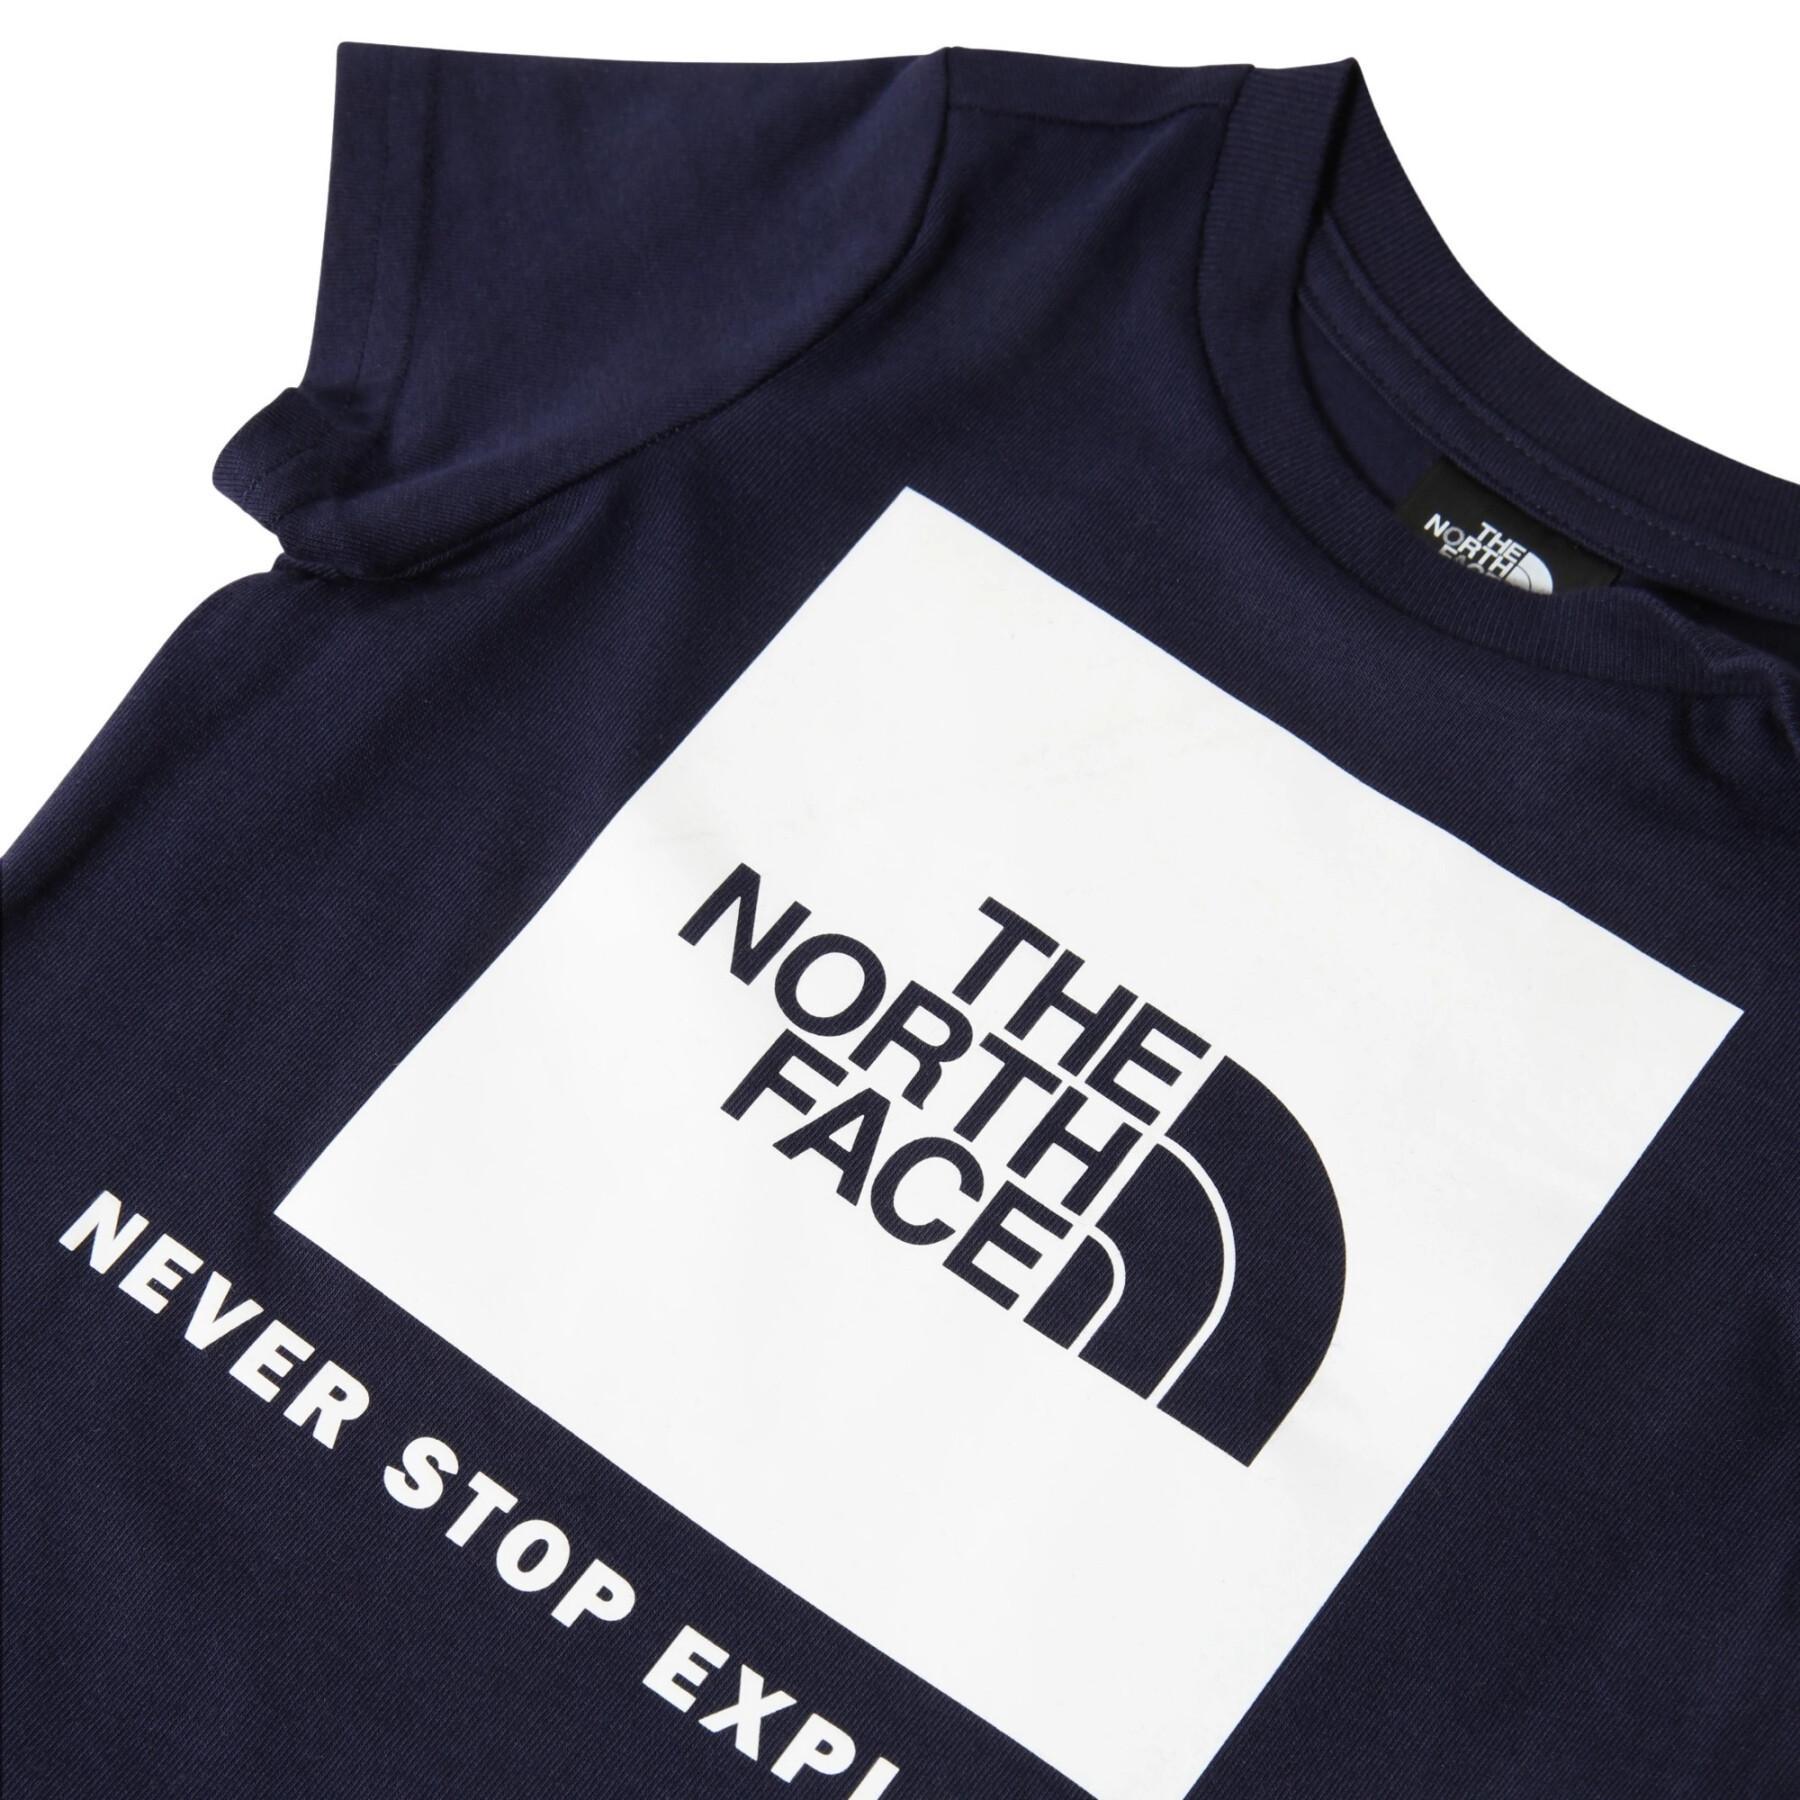 T-shirt för baby The North Face Inf Graphic